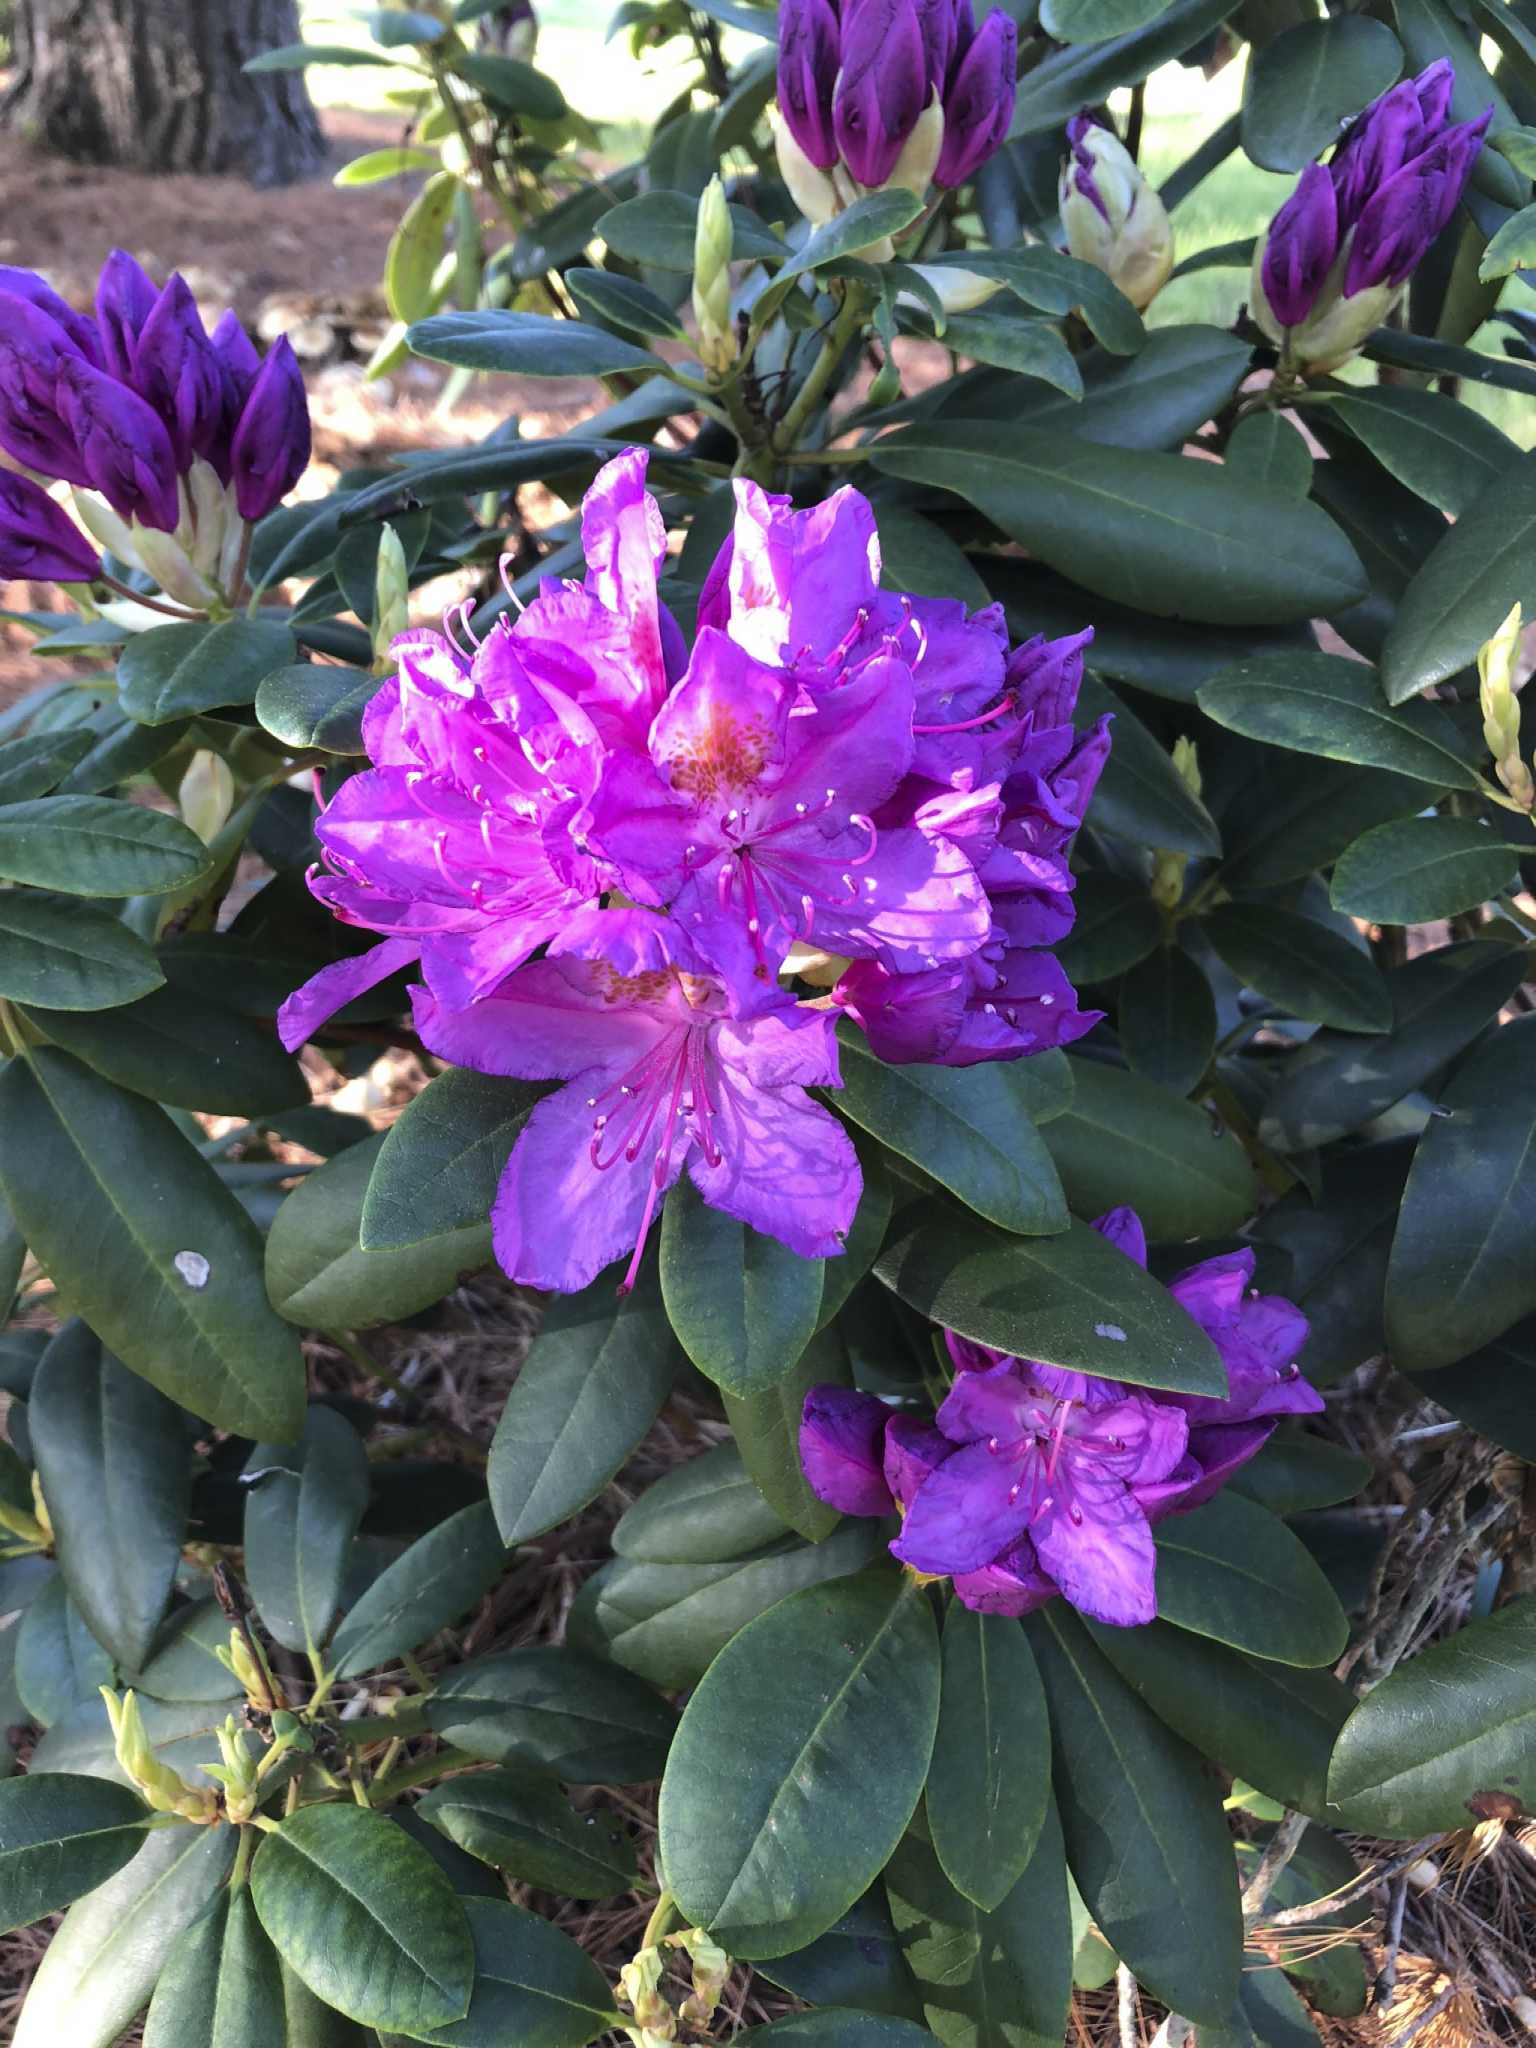 Martin: Rhododendrons